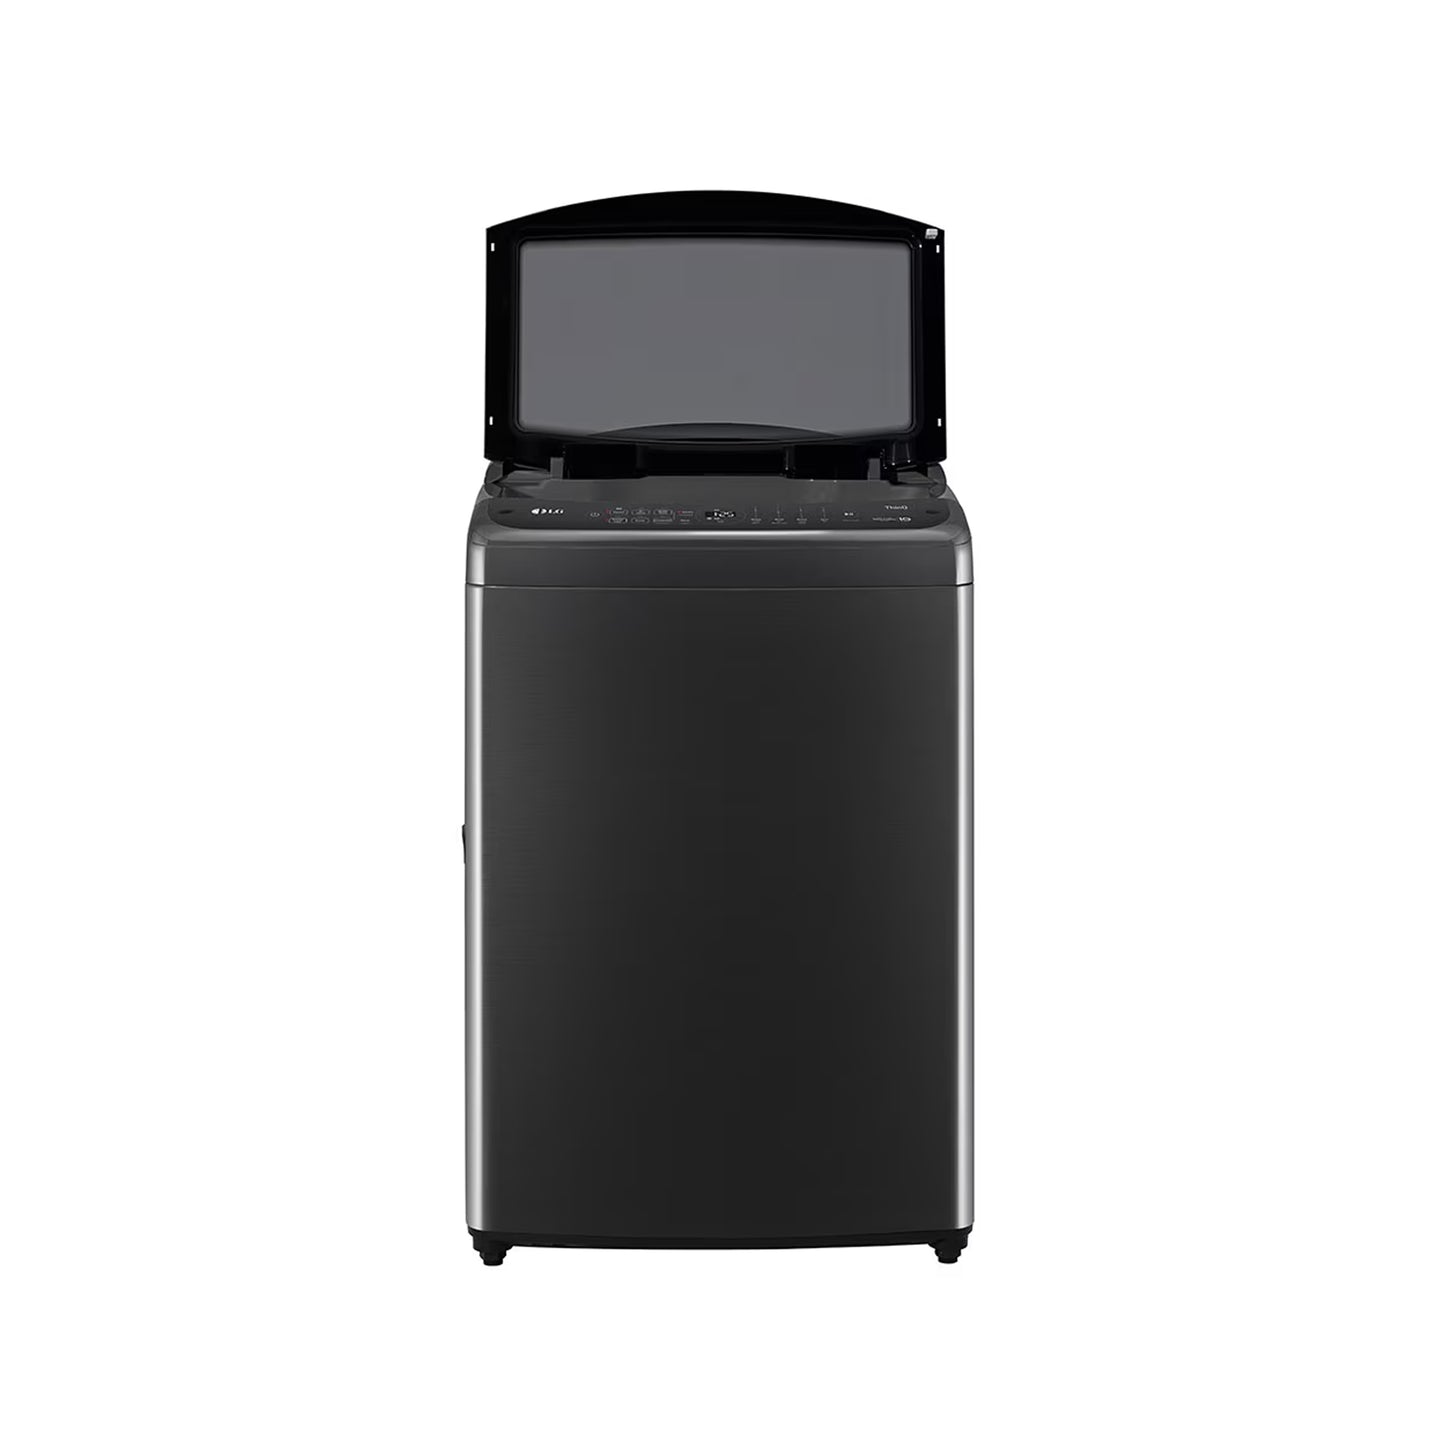 LG 21kg Top Load Washing Machine with AI DD In Black Finish